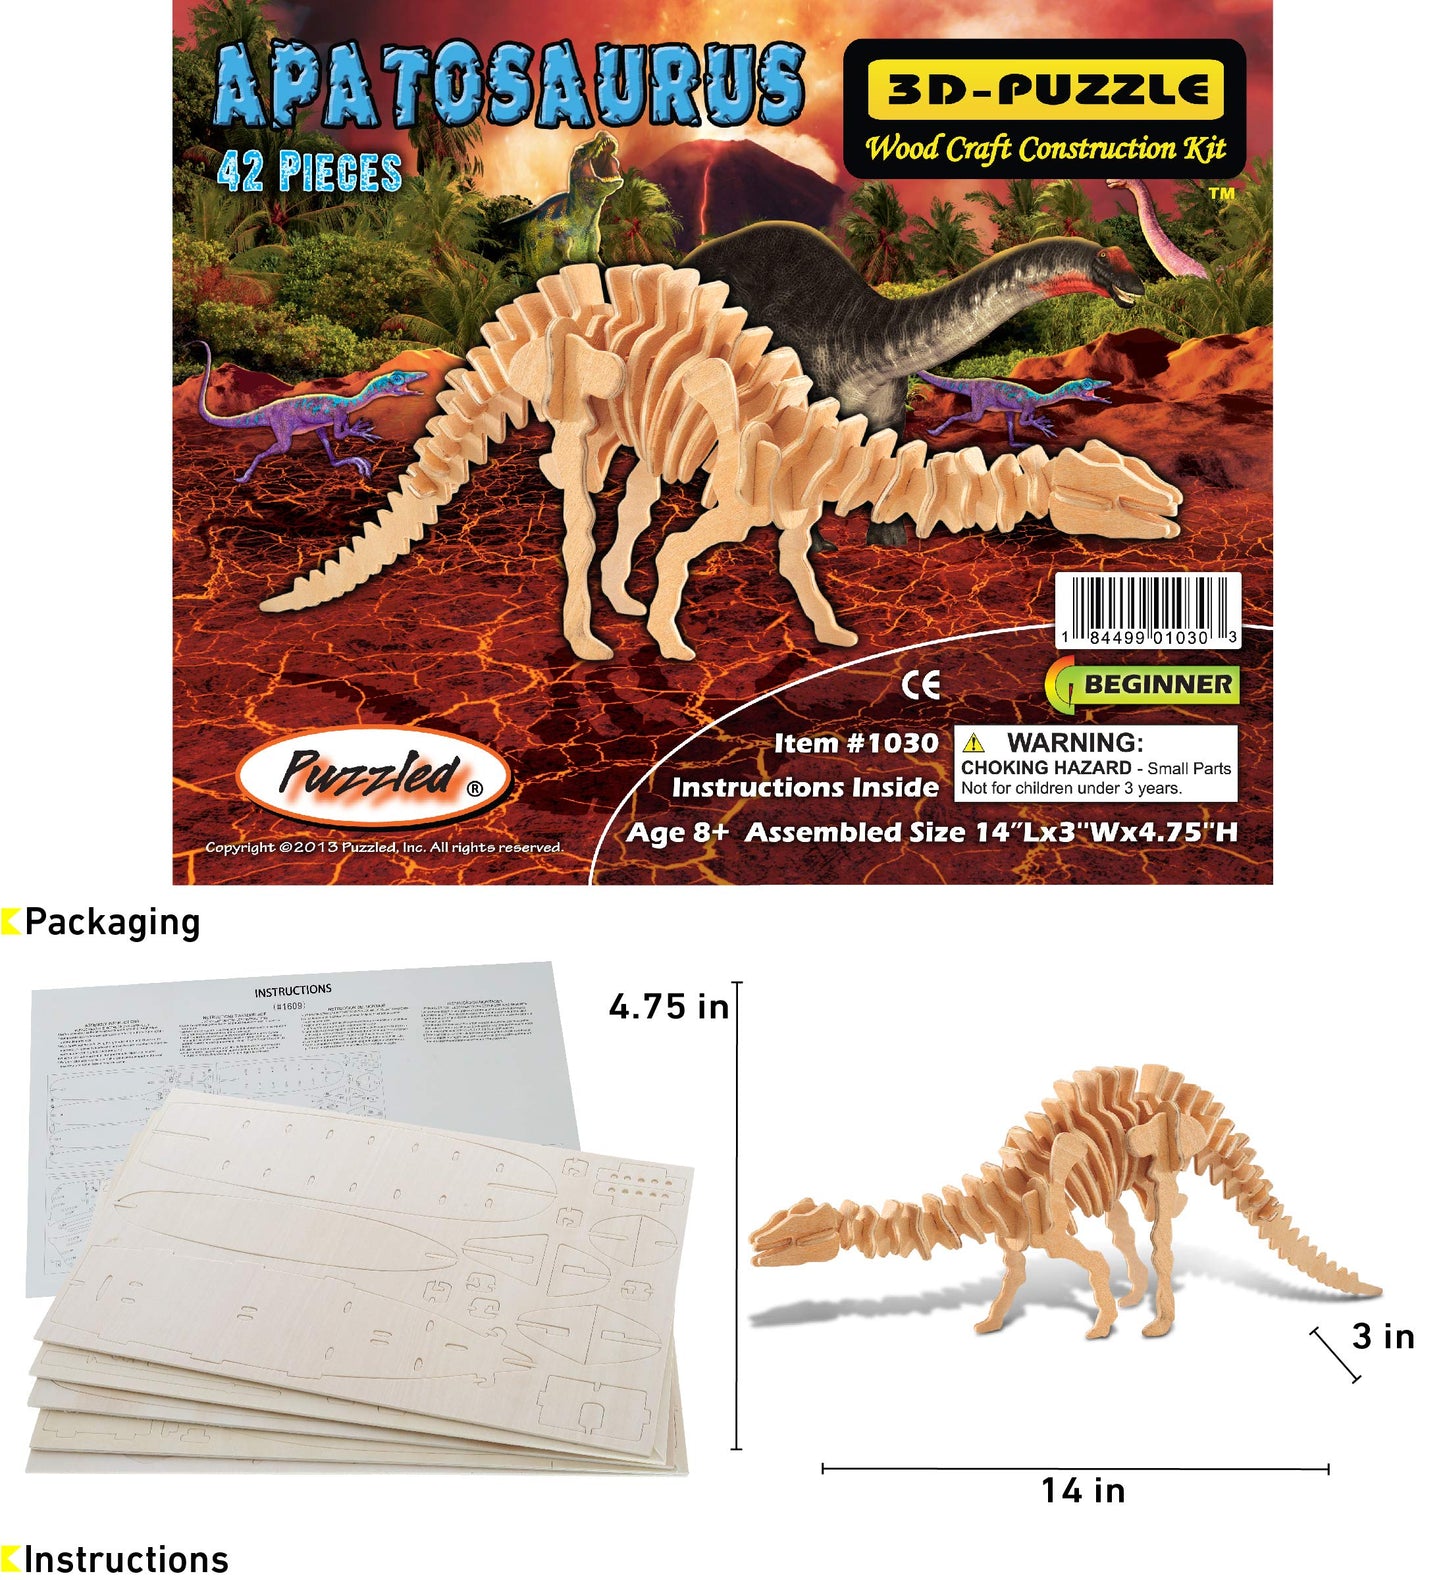 Puzzled 3D Puzzle Apatosaurus Dinosaur Wood Craft Construction Model Kit, Fun Unique & Educational DIY Wooden Toy Assemble Unfinished Crafting Hobby